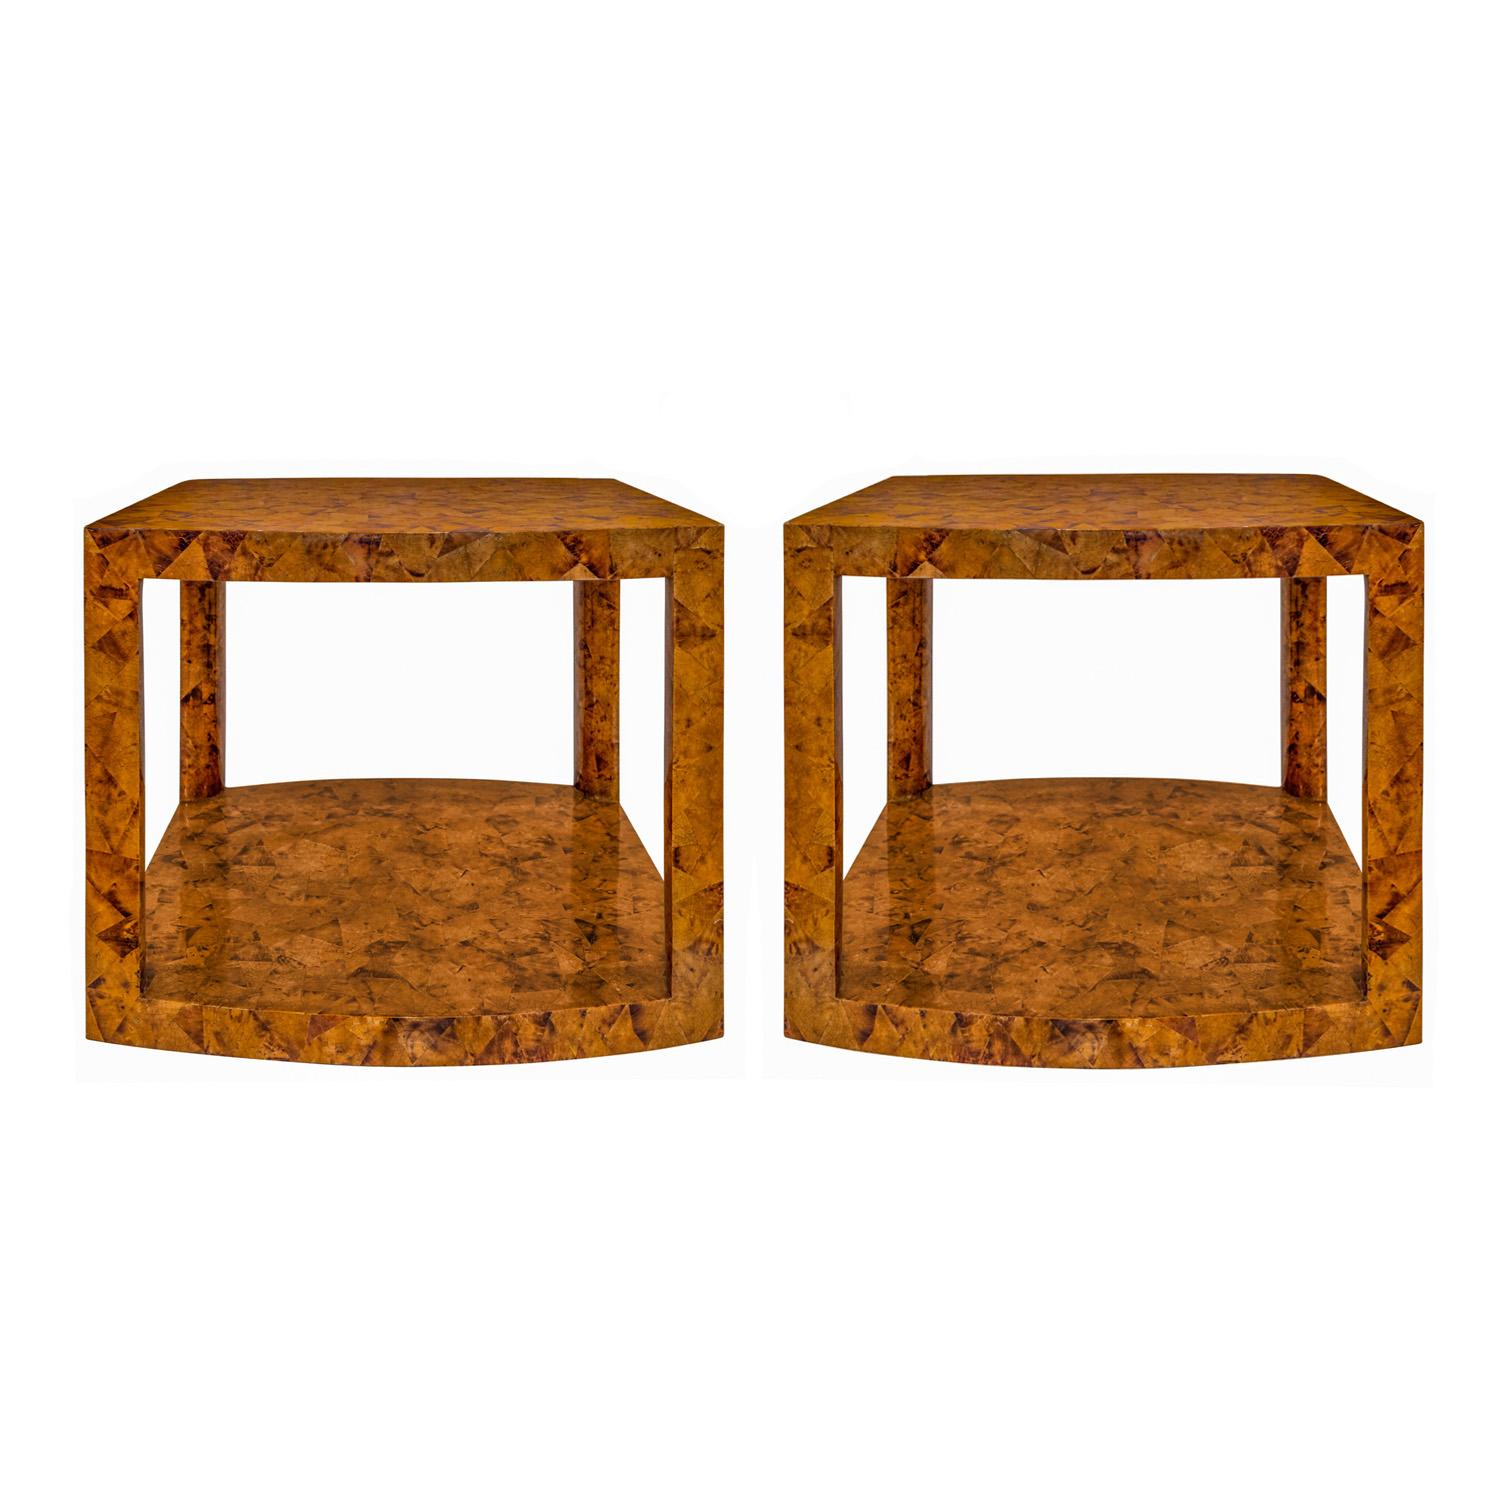 Exceptionally crafted pair of large 2 tier end tables with curved ends in tessellated penshell by Karl Springer, American 1980's (shown with original Karl Springer label on bottom).  The artisanship of these Karl Springer tables is absolutely